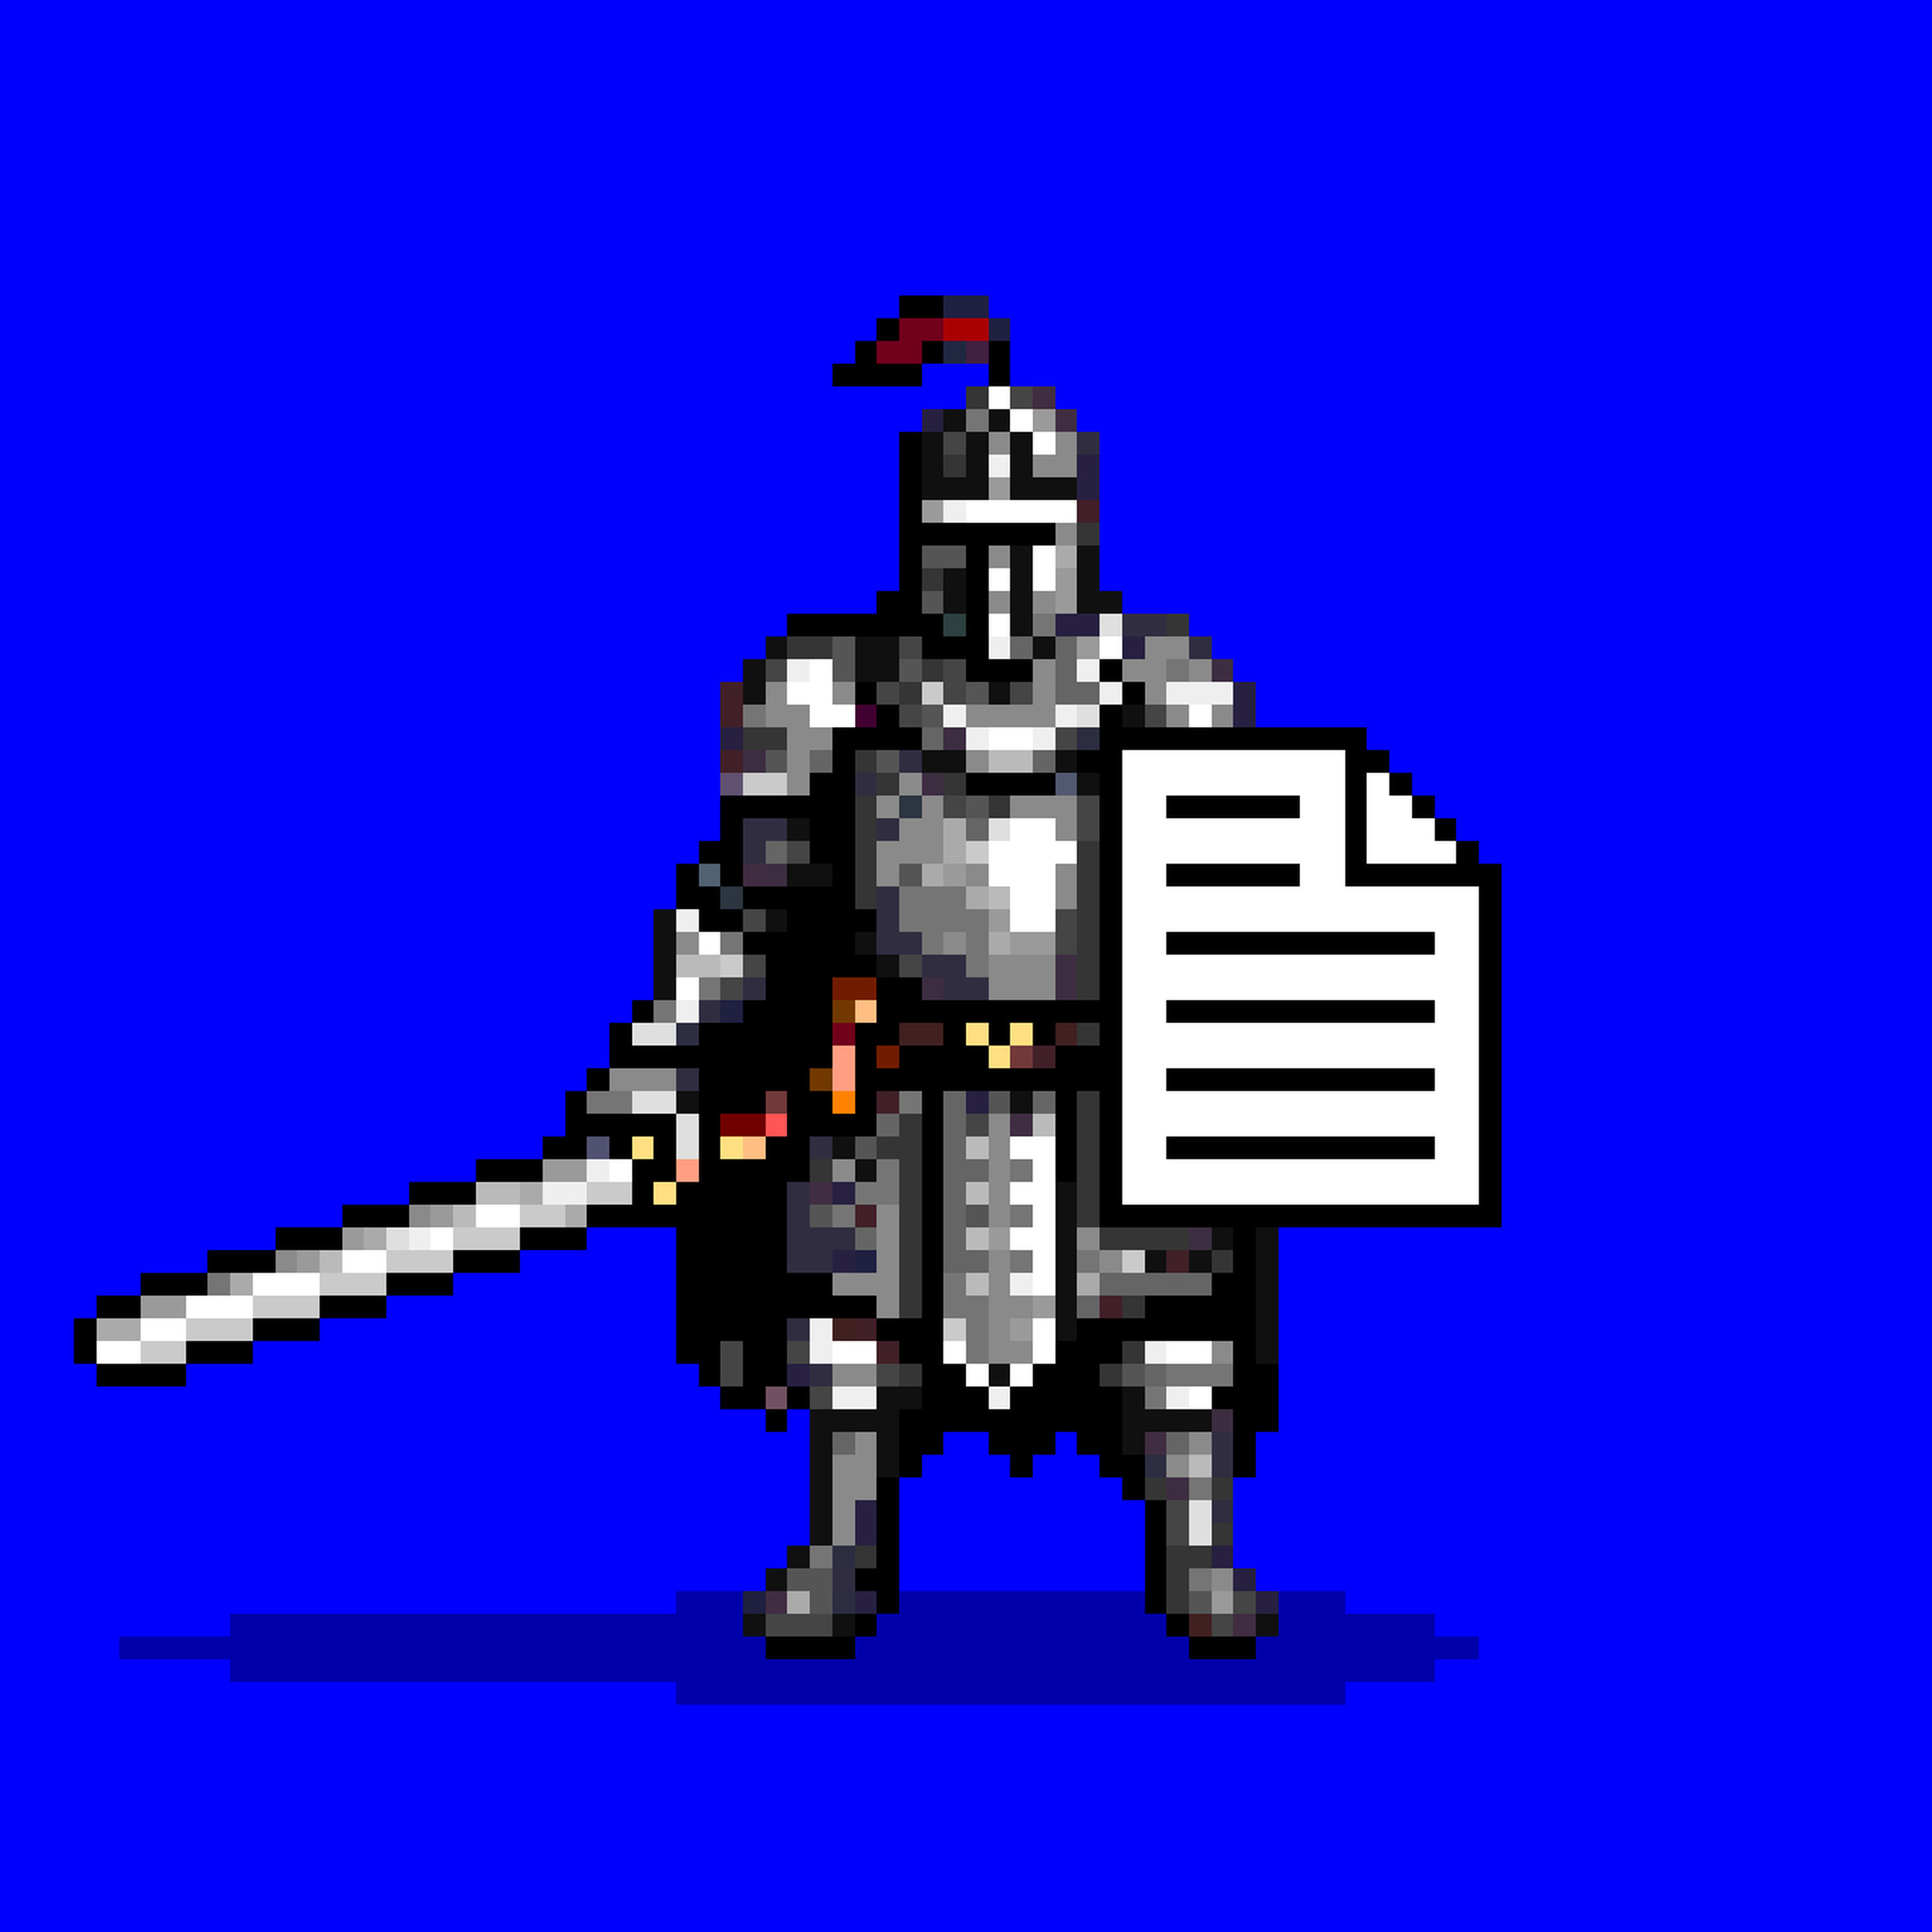 Pixel illustration of a knight holding a text file as a shield.